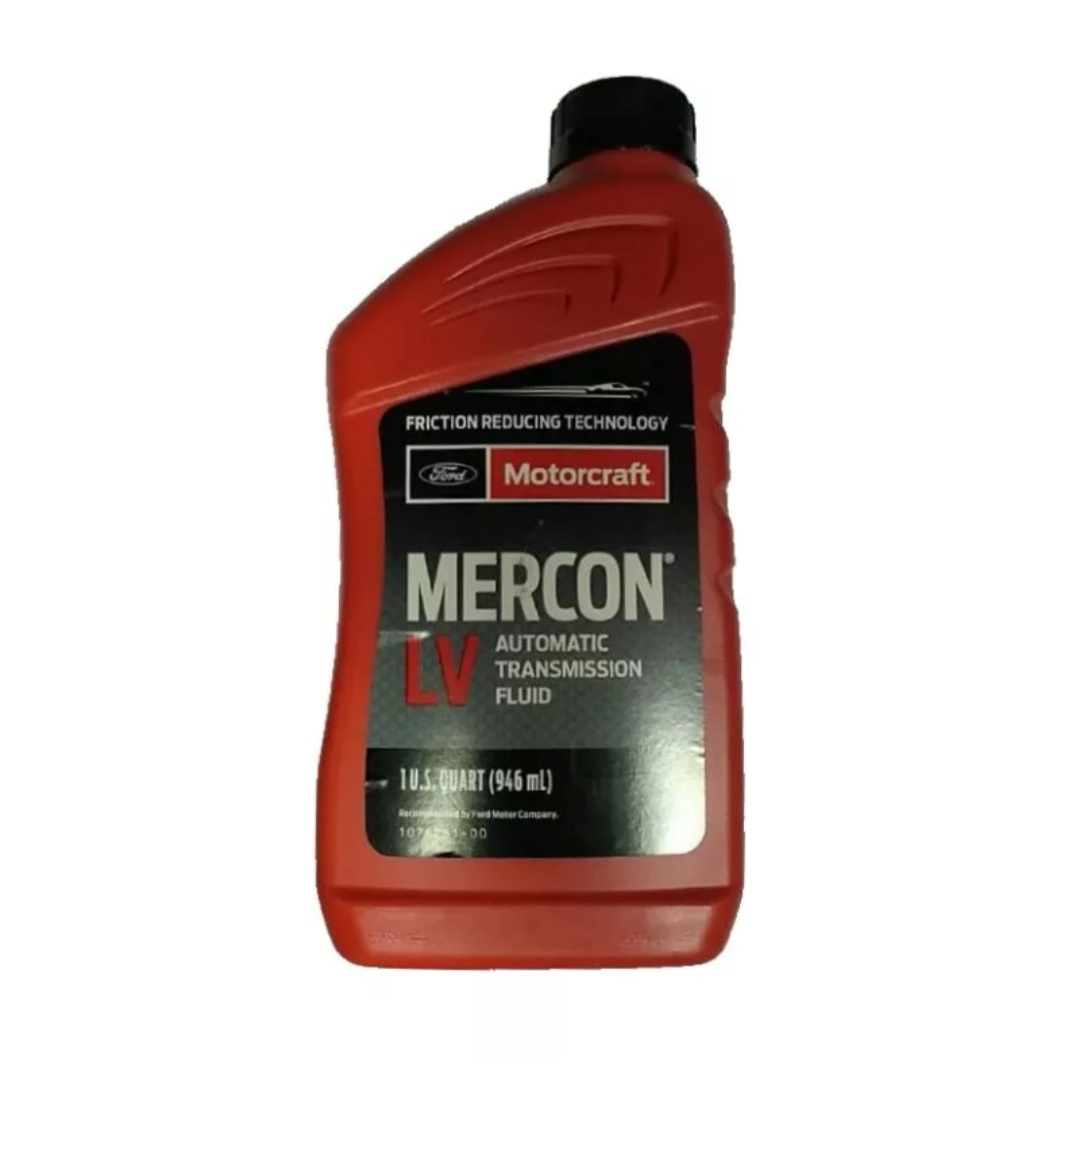 Ford atf. Ford Motorcraft Mercon ATF lv. Масло Motorcraft (Ford) трансмиссионное Mercon lv (АКПП) 1л. ATF масло Ford Mercon v трансмиссионное. Ford Mercon lv Automatic transmission Fluid 946 мл.